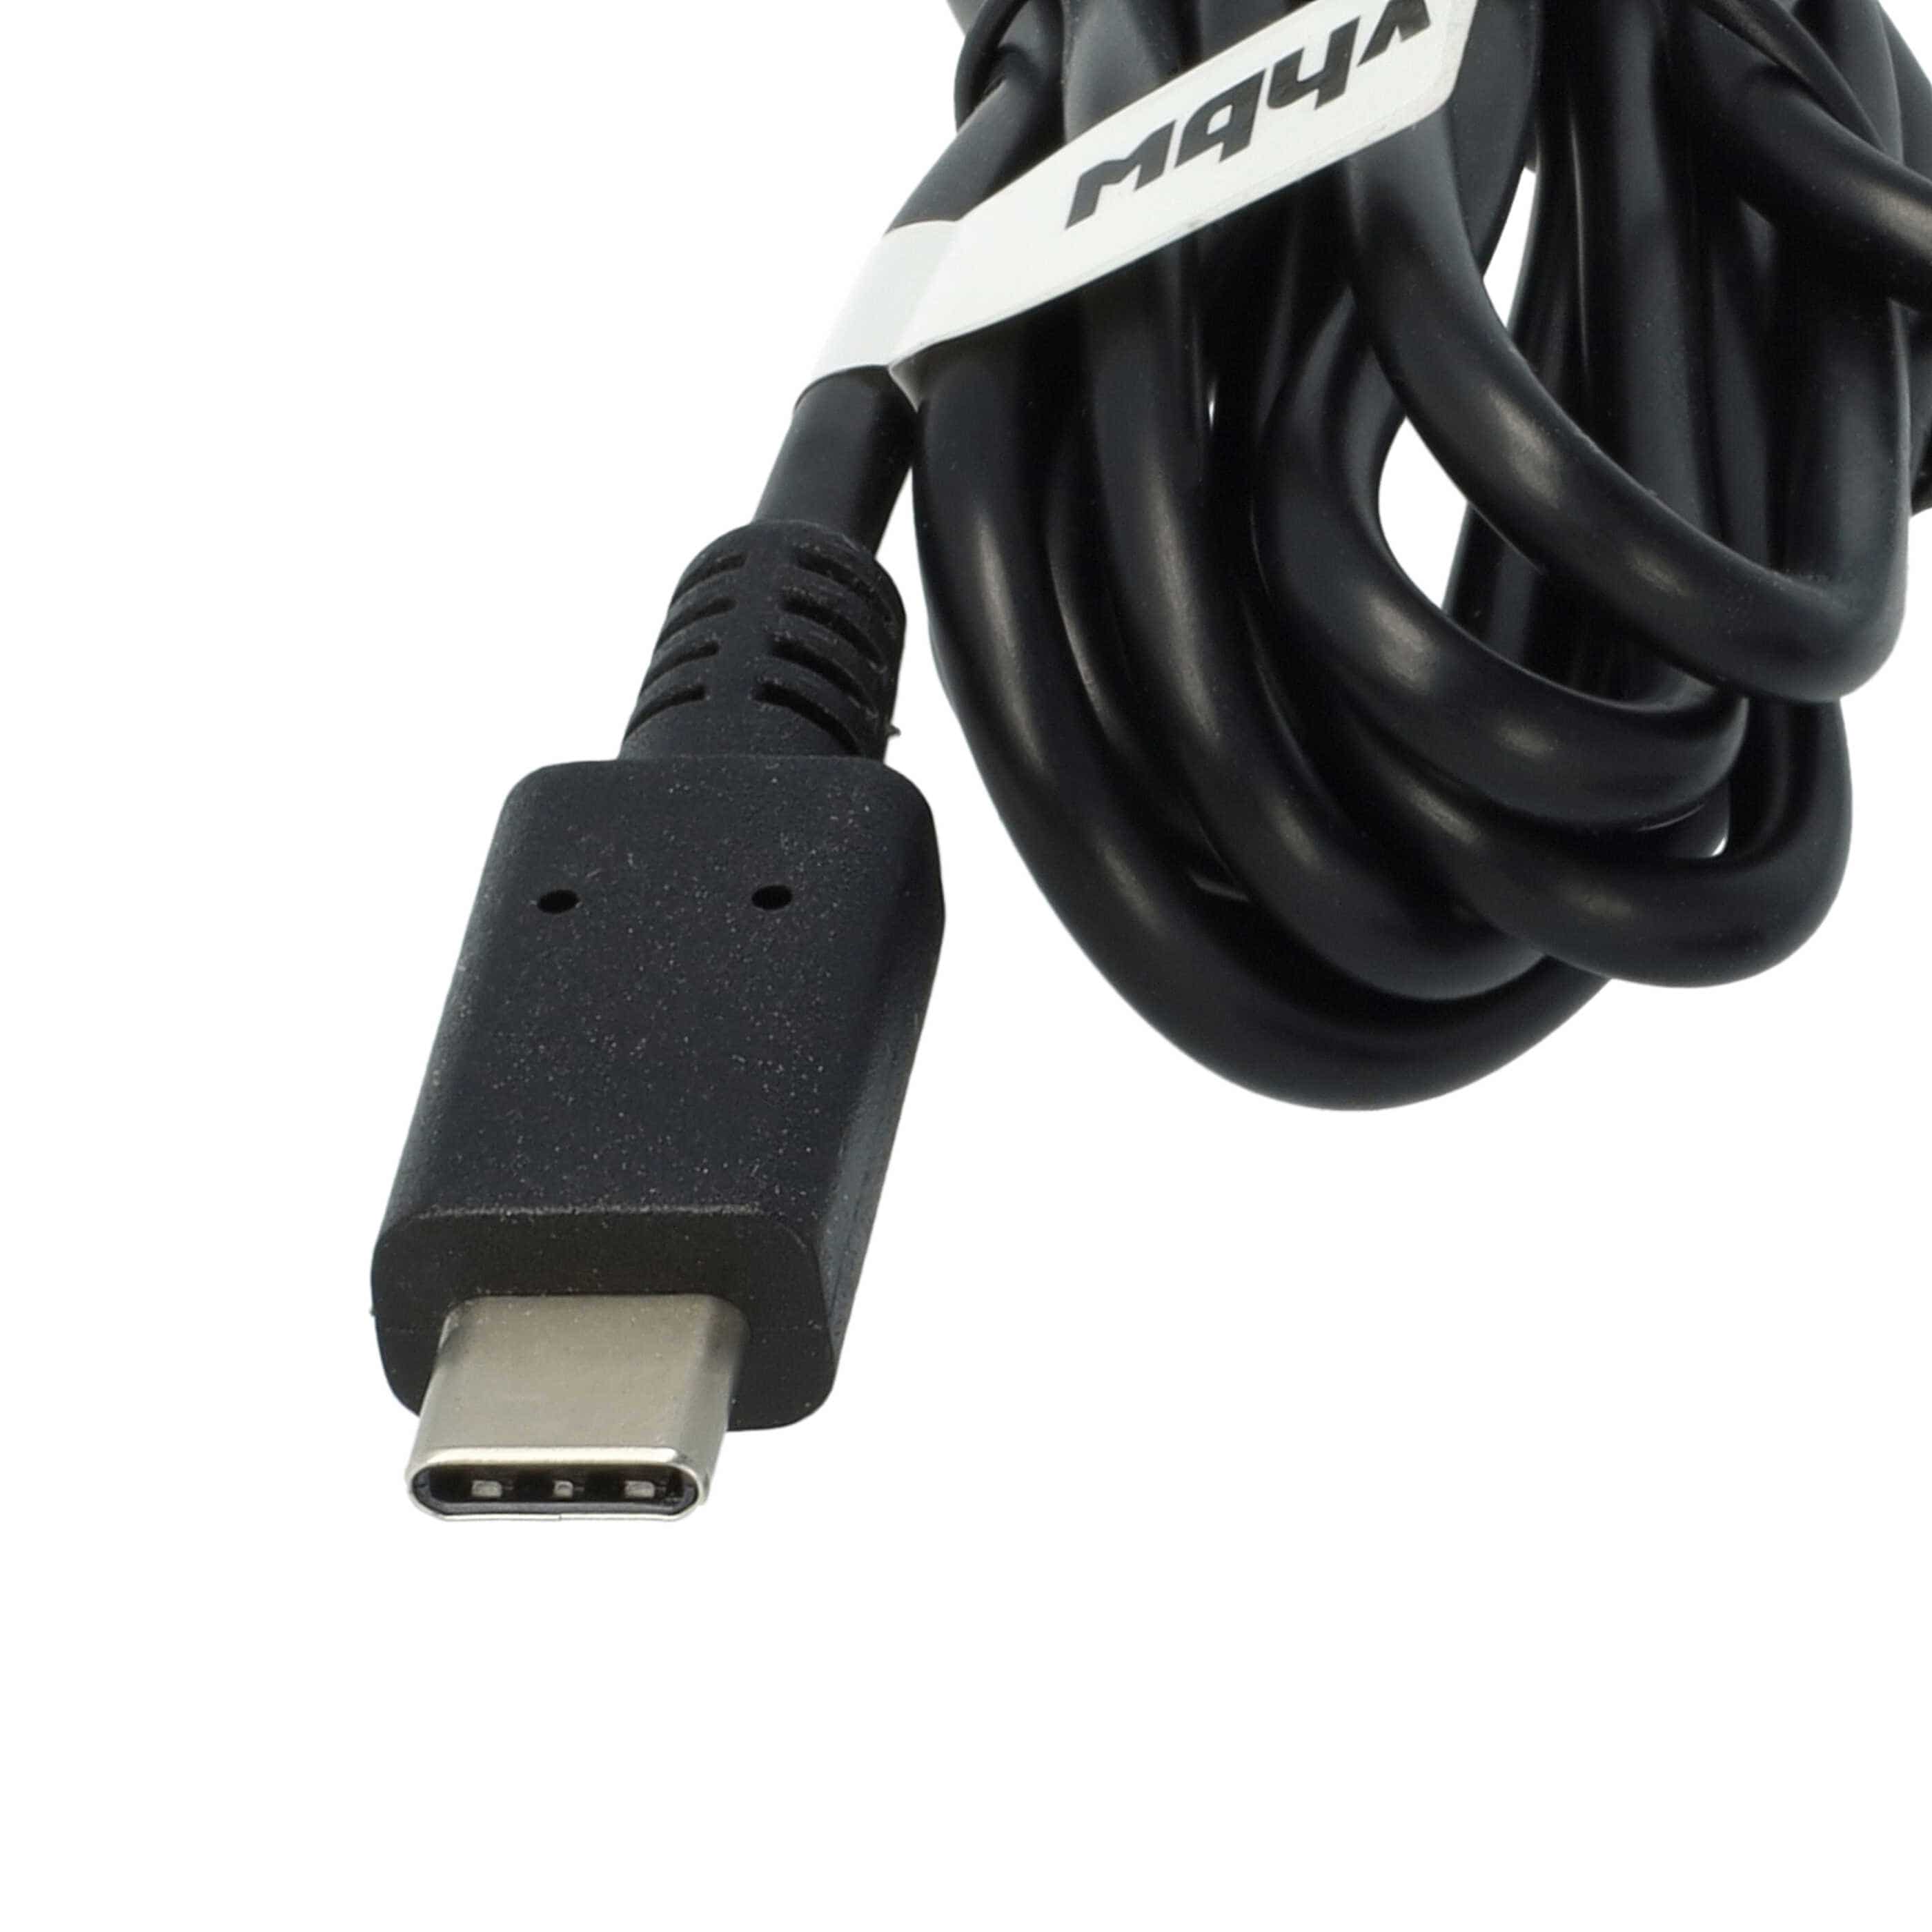 USB C Car Charger Cable 2.4 A suitable for Book HuaweiDevices like Smartphone, GPS, Sat Navs